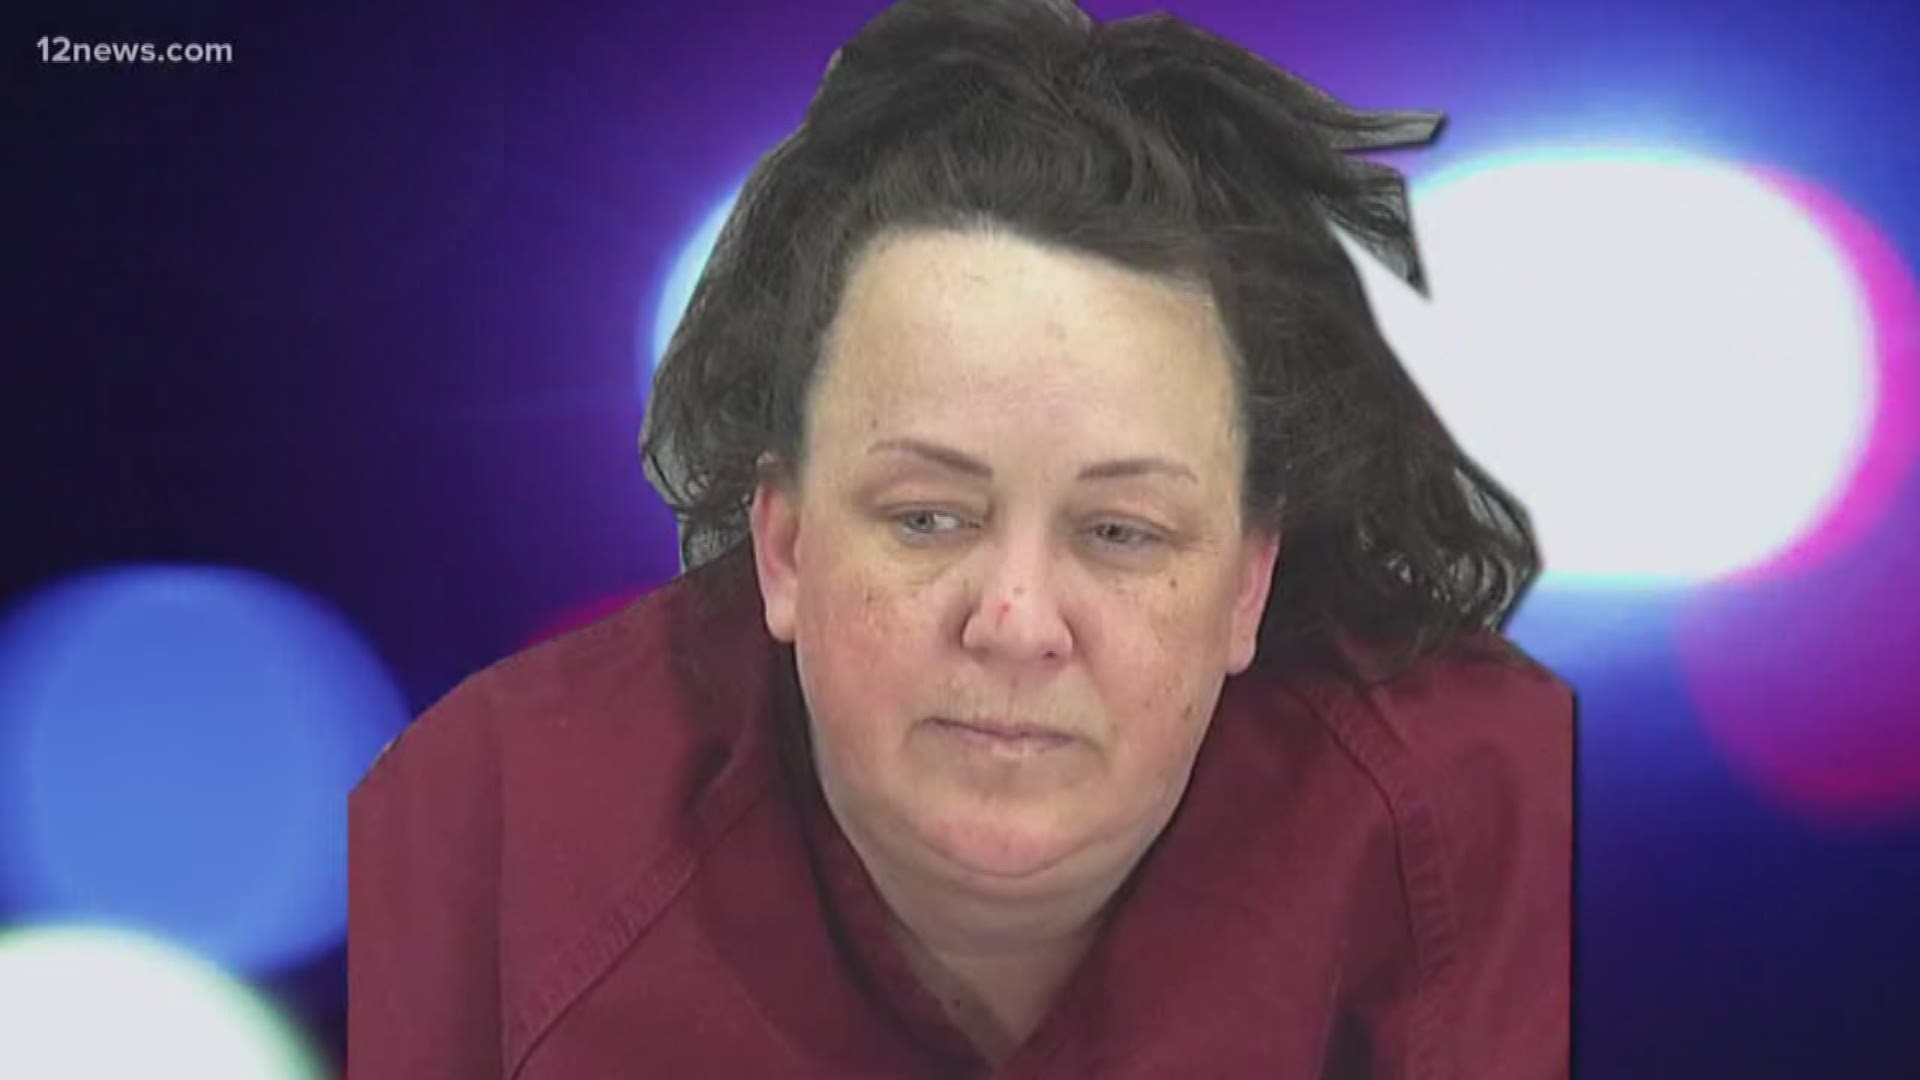 Machelle Hobson, the woman accused of molesting and abusing her seven adopted children, has no criminal history. A family member tells 12 News that Hobson has five biological children in addition to the adopted kids. One of the biological children reported the abuse to police.